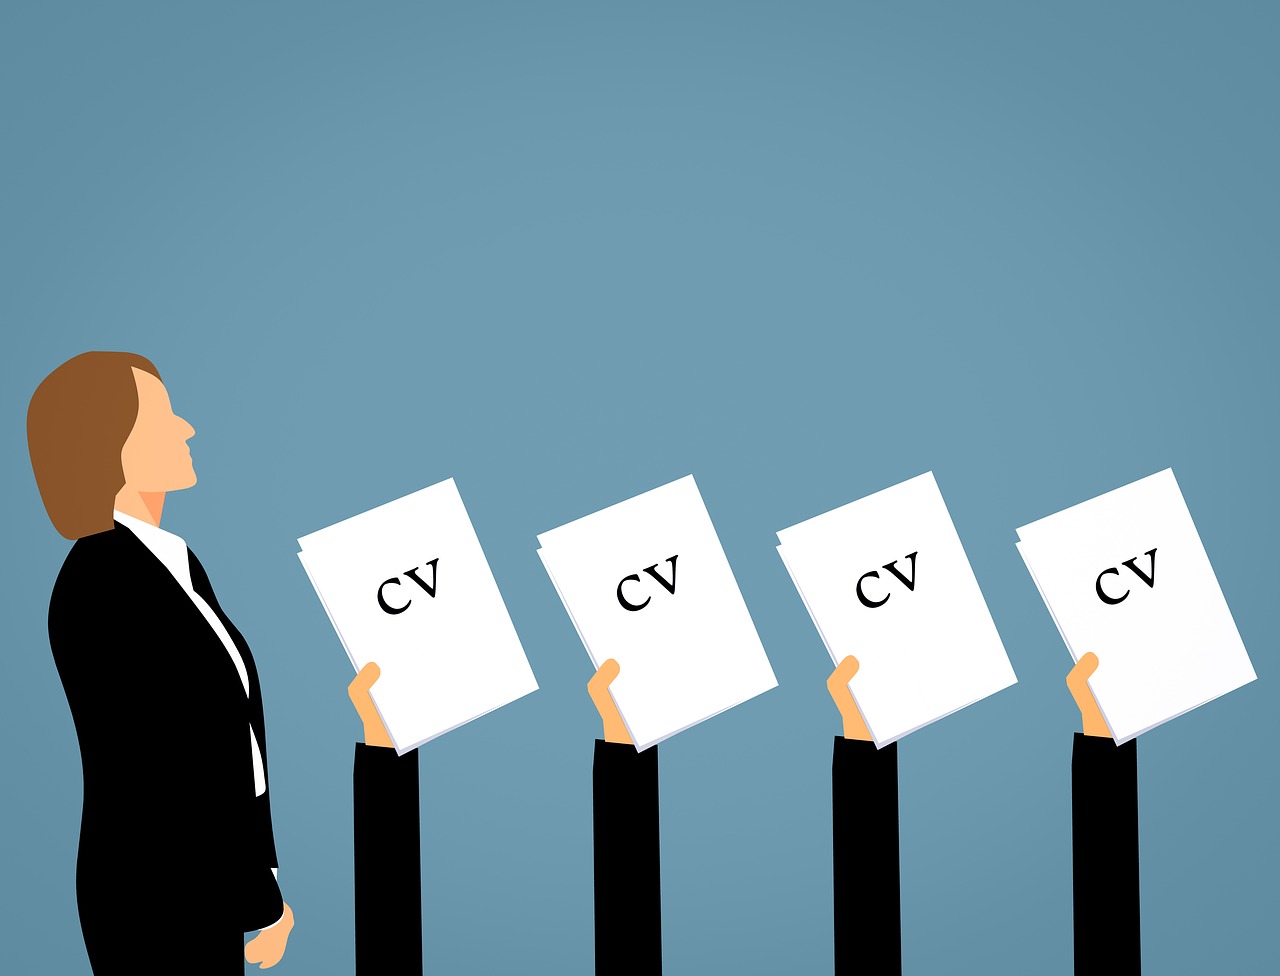 Securing the internship and making your CV stand out